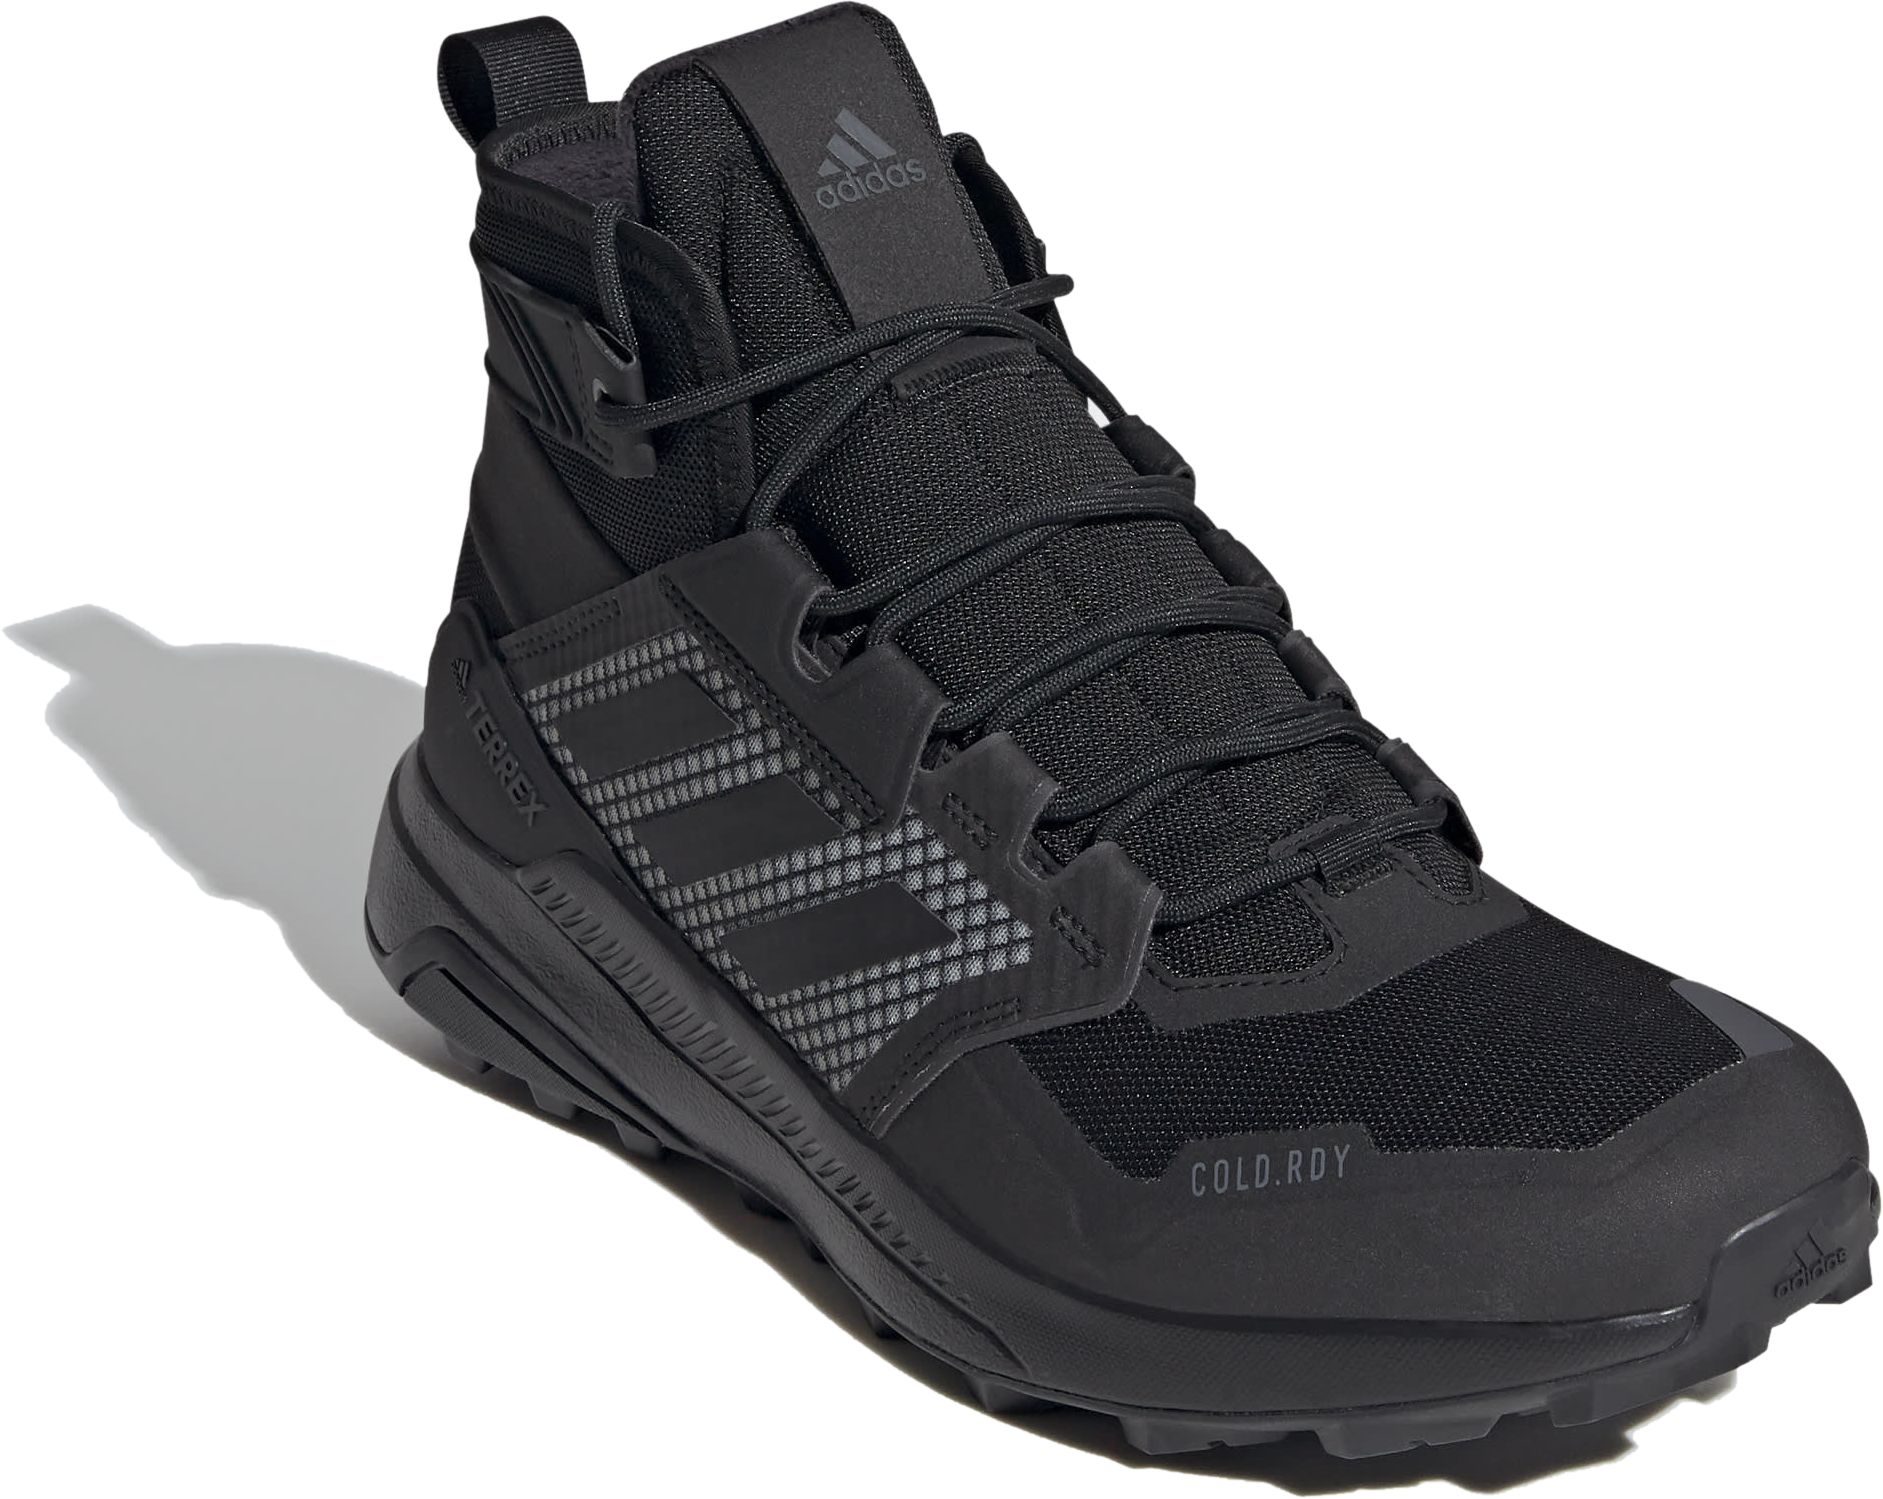 ADIDAS, Terrex Trailmaker Mid COLD.RDY Hiking Shoes